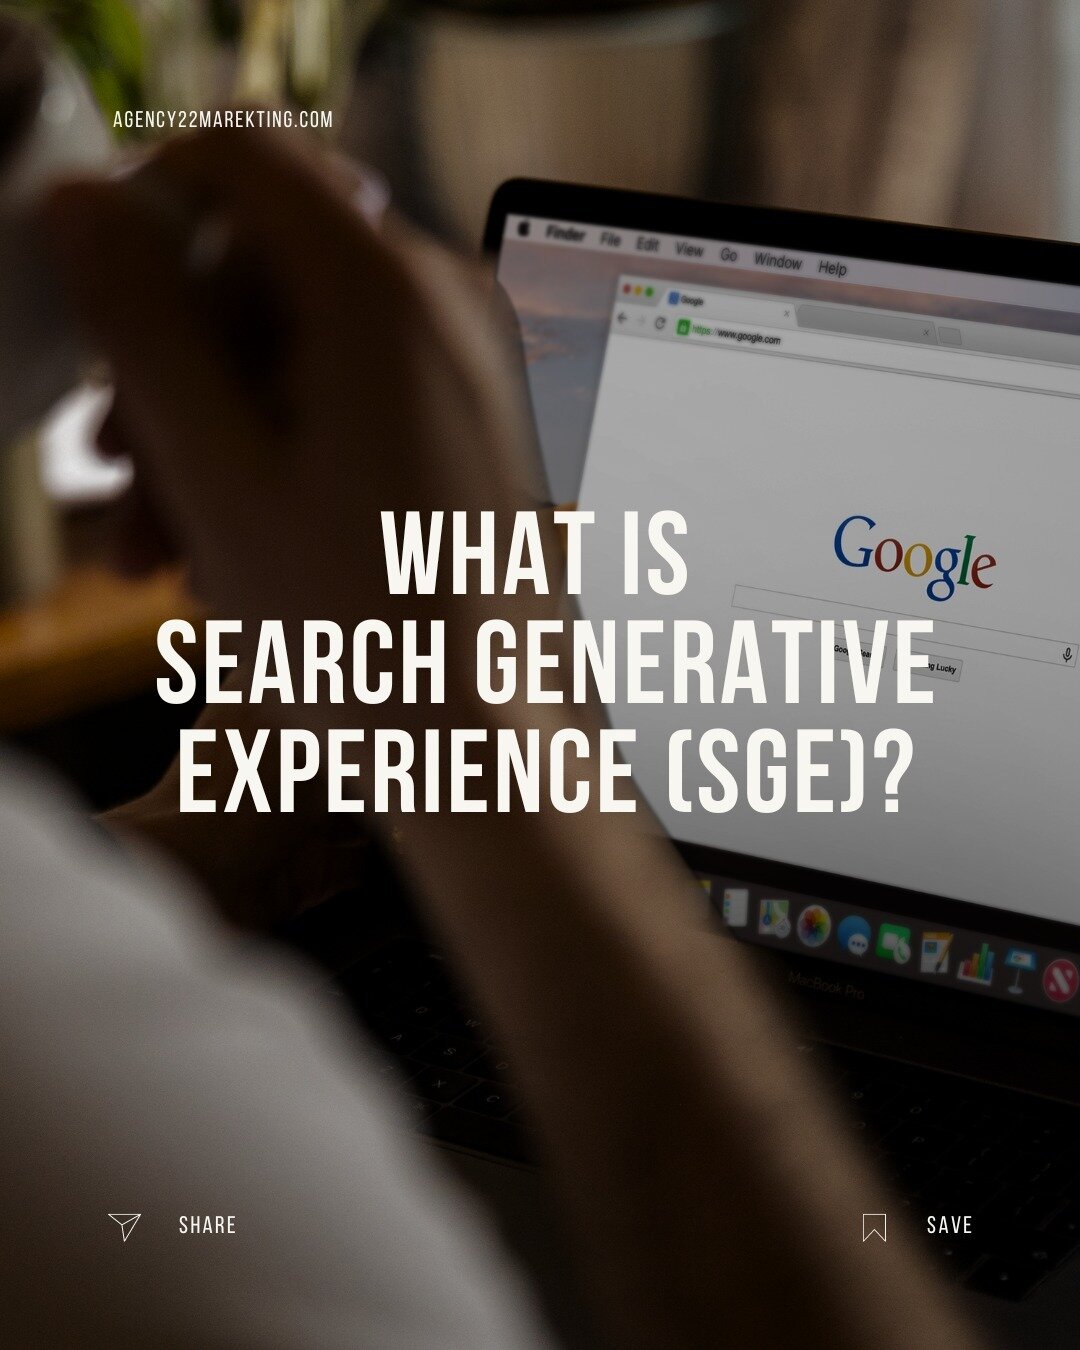 Are you ready for the future of @Google Search? 🌐 Google is revolutionizing the search experience with SGE - Search Generative Experience! 

This approach is set to transform how your customers find you online. As an expert in digital marketing, we 